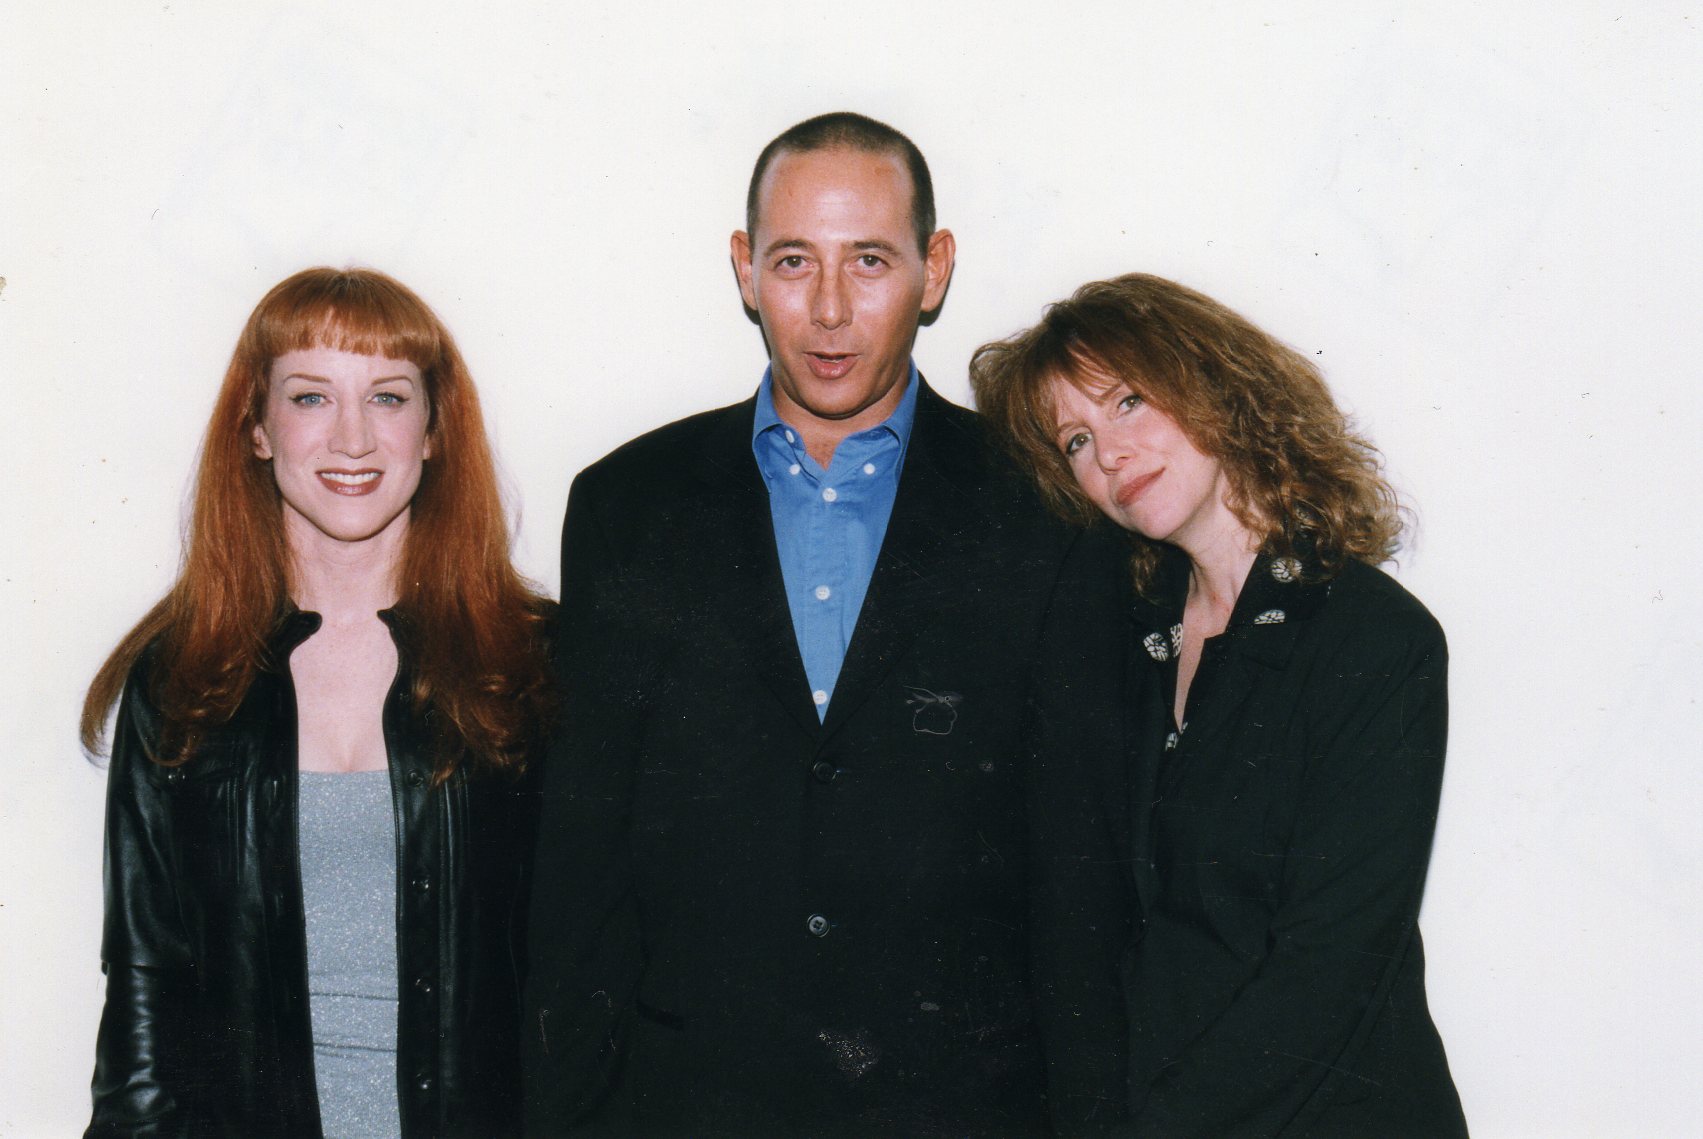 Kathy Griffin, Paul Rubens and Laraine Newman at The Museum of Radio and Television